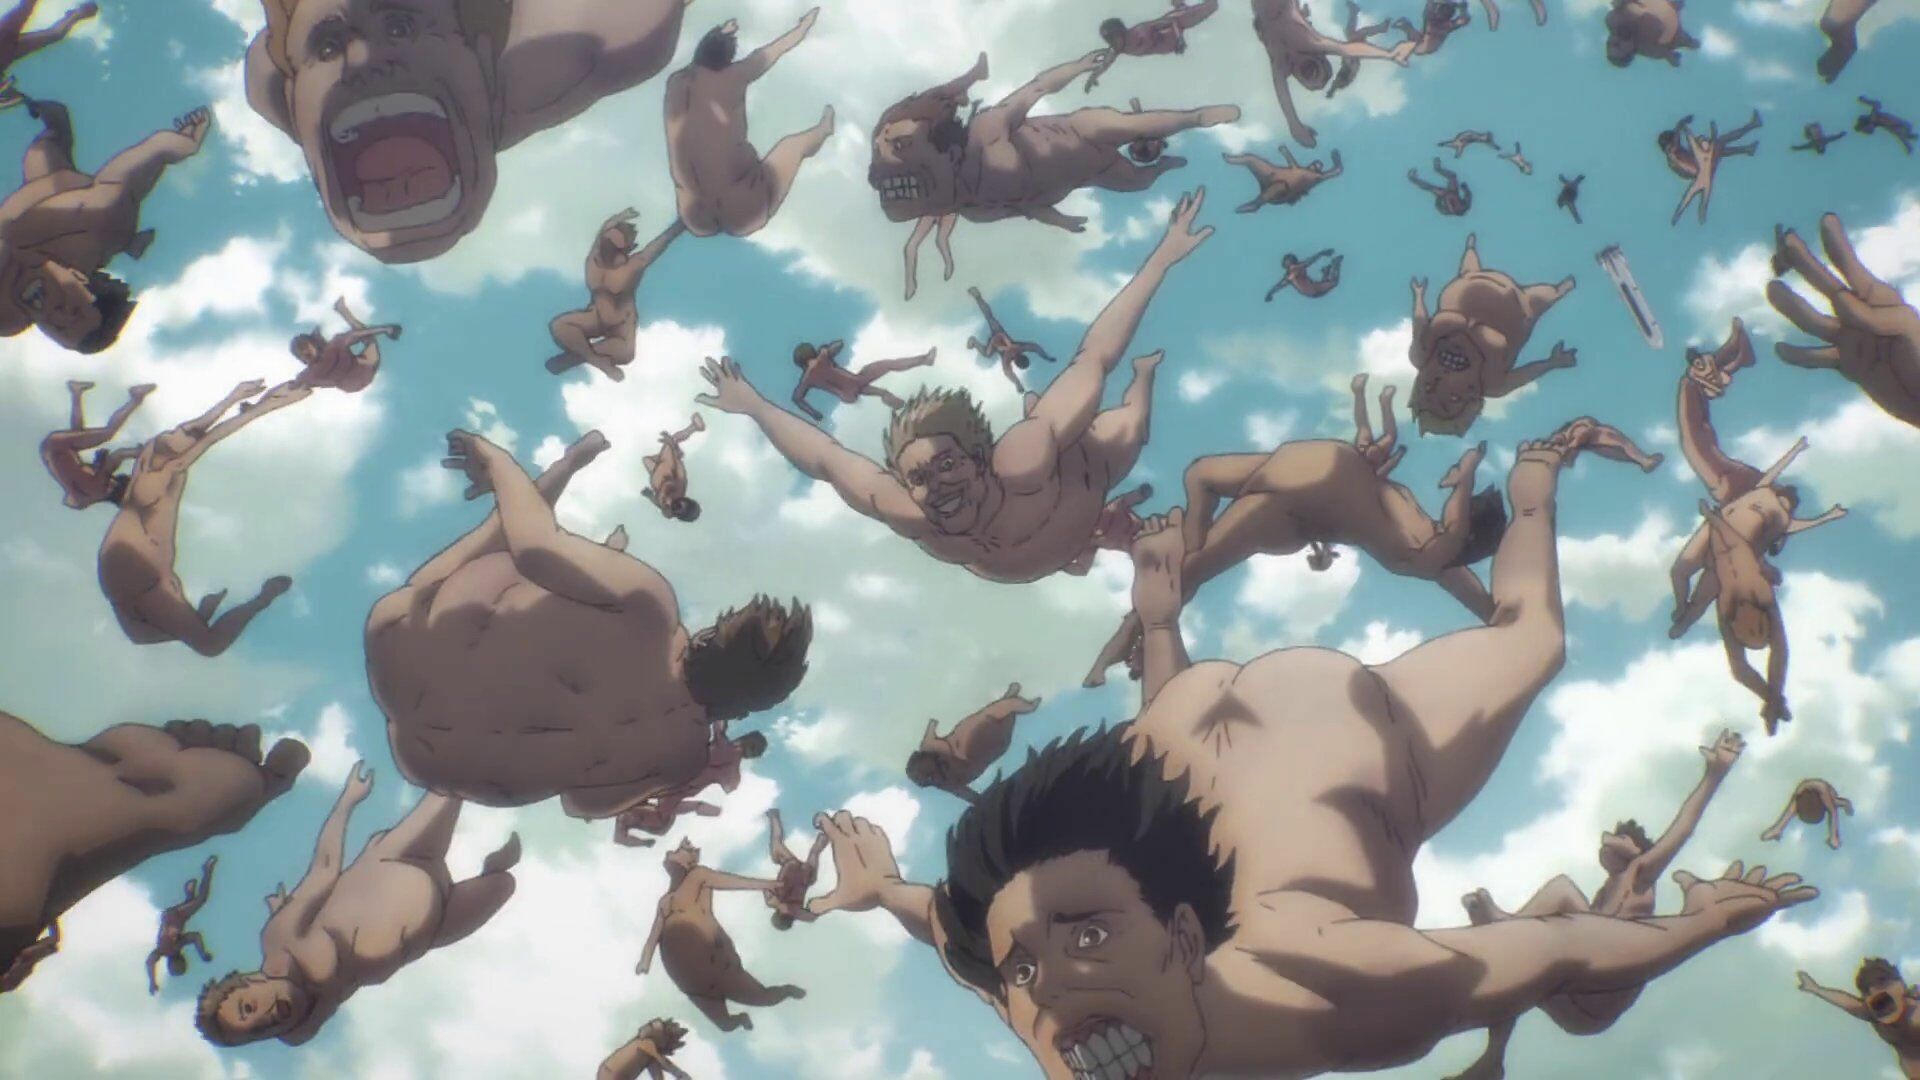 Attack on Titan (TV Series): Anime, Set in a fantasy world, Man-eating giants. 1920x1080 Full HD Background.